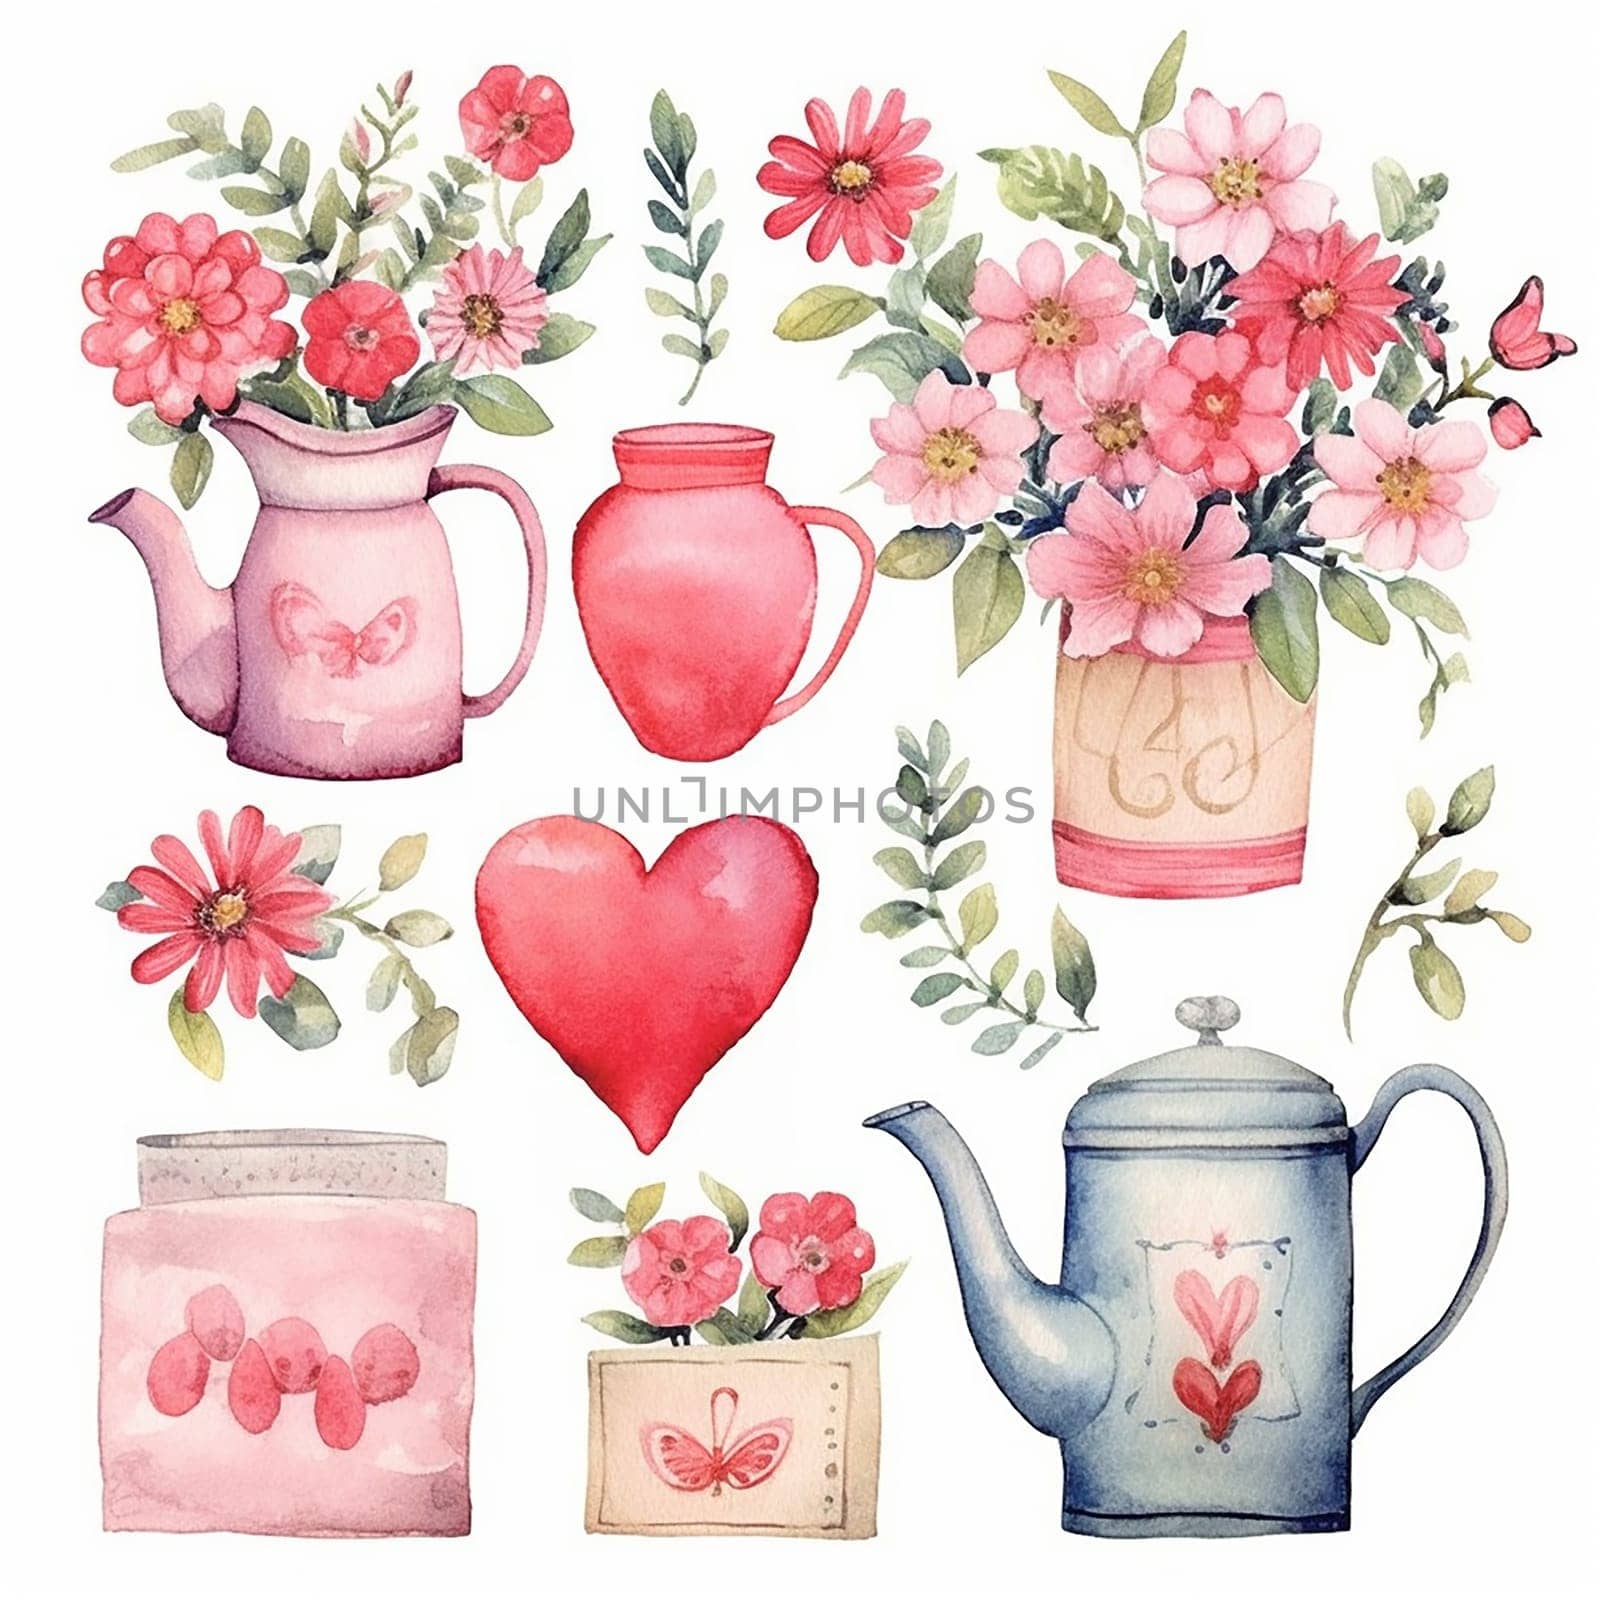 Various watercolor illustrations including floral arrangements, teapots, and a heart. by Hype2art